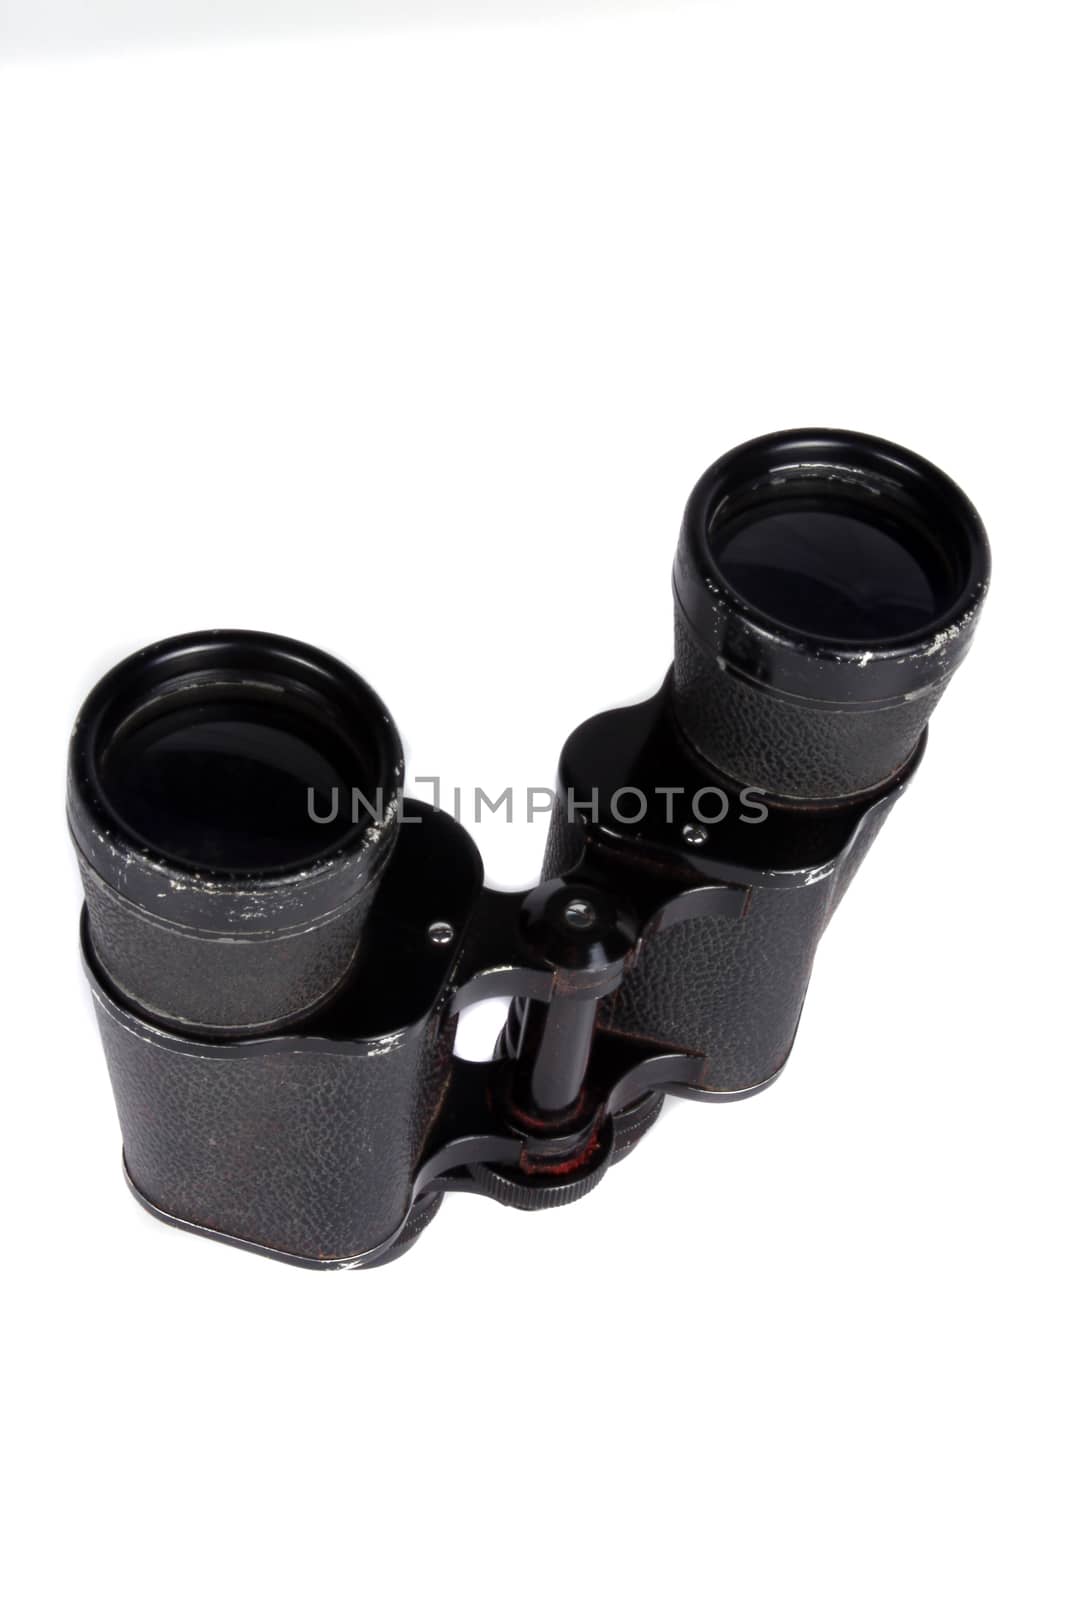 A pair of antique binoculars used in World War 1, on white studio background.